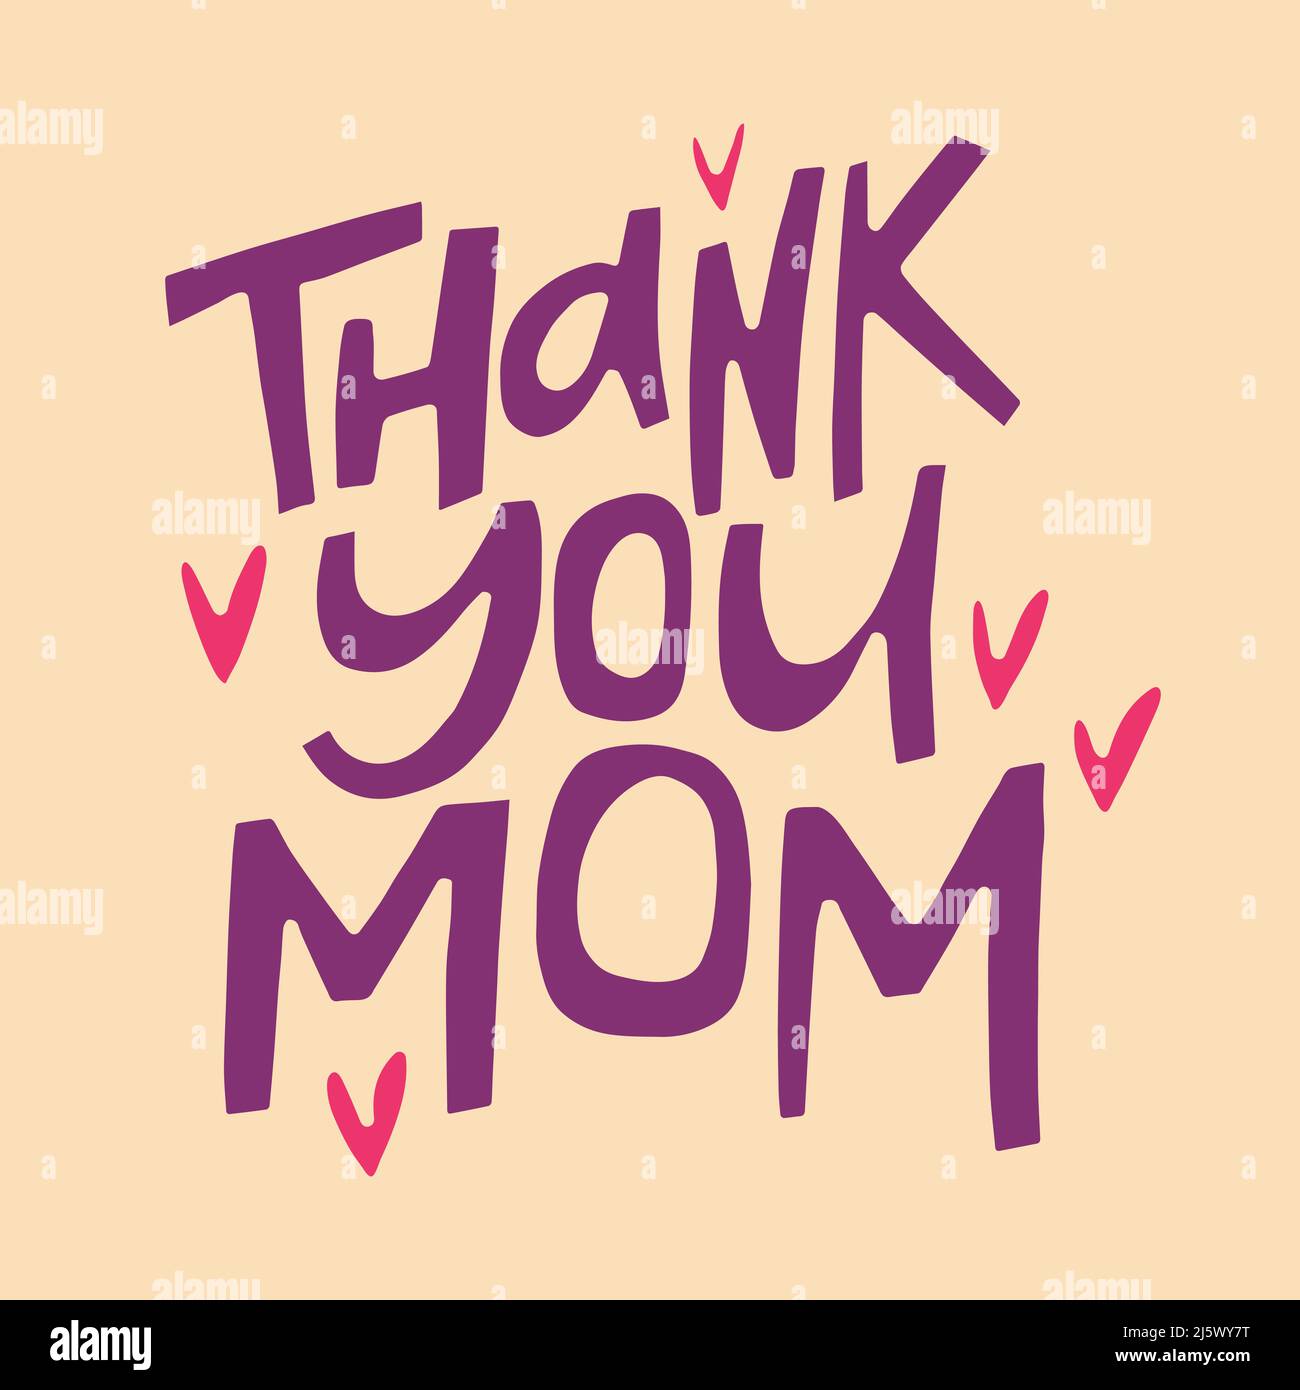 Thank You Mom Hand Drawn Quote Creative Lettering Illustration For Posters Cards Etc Stock 7493